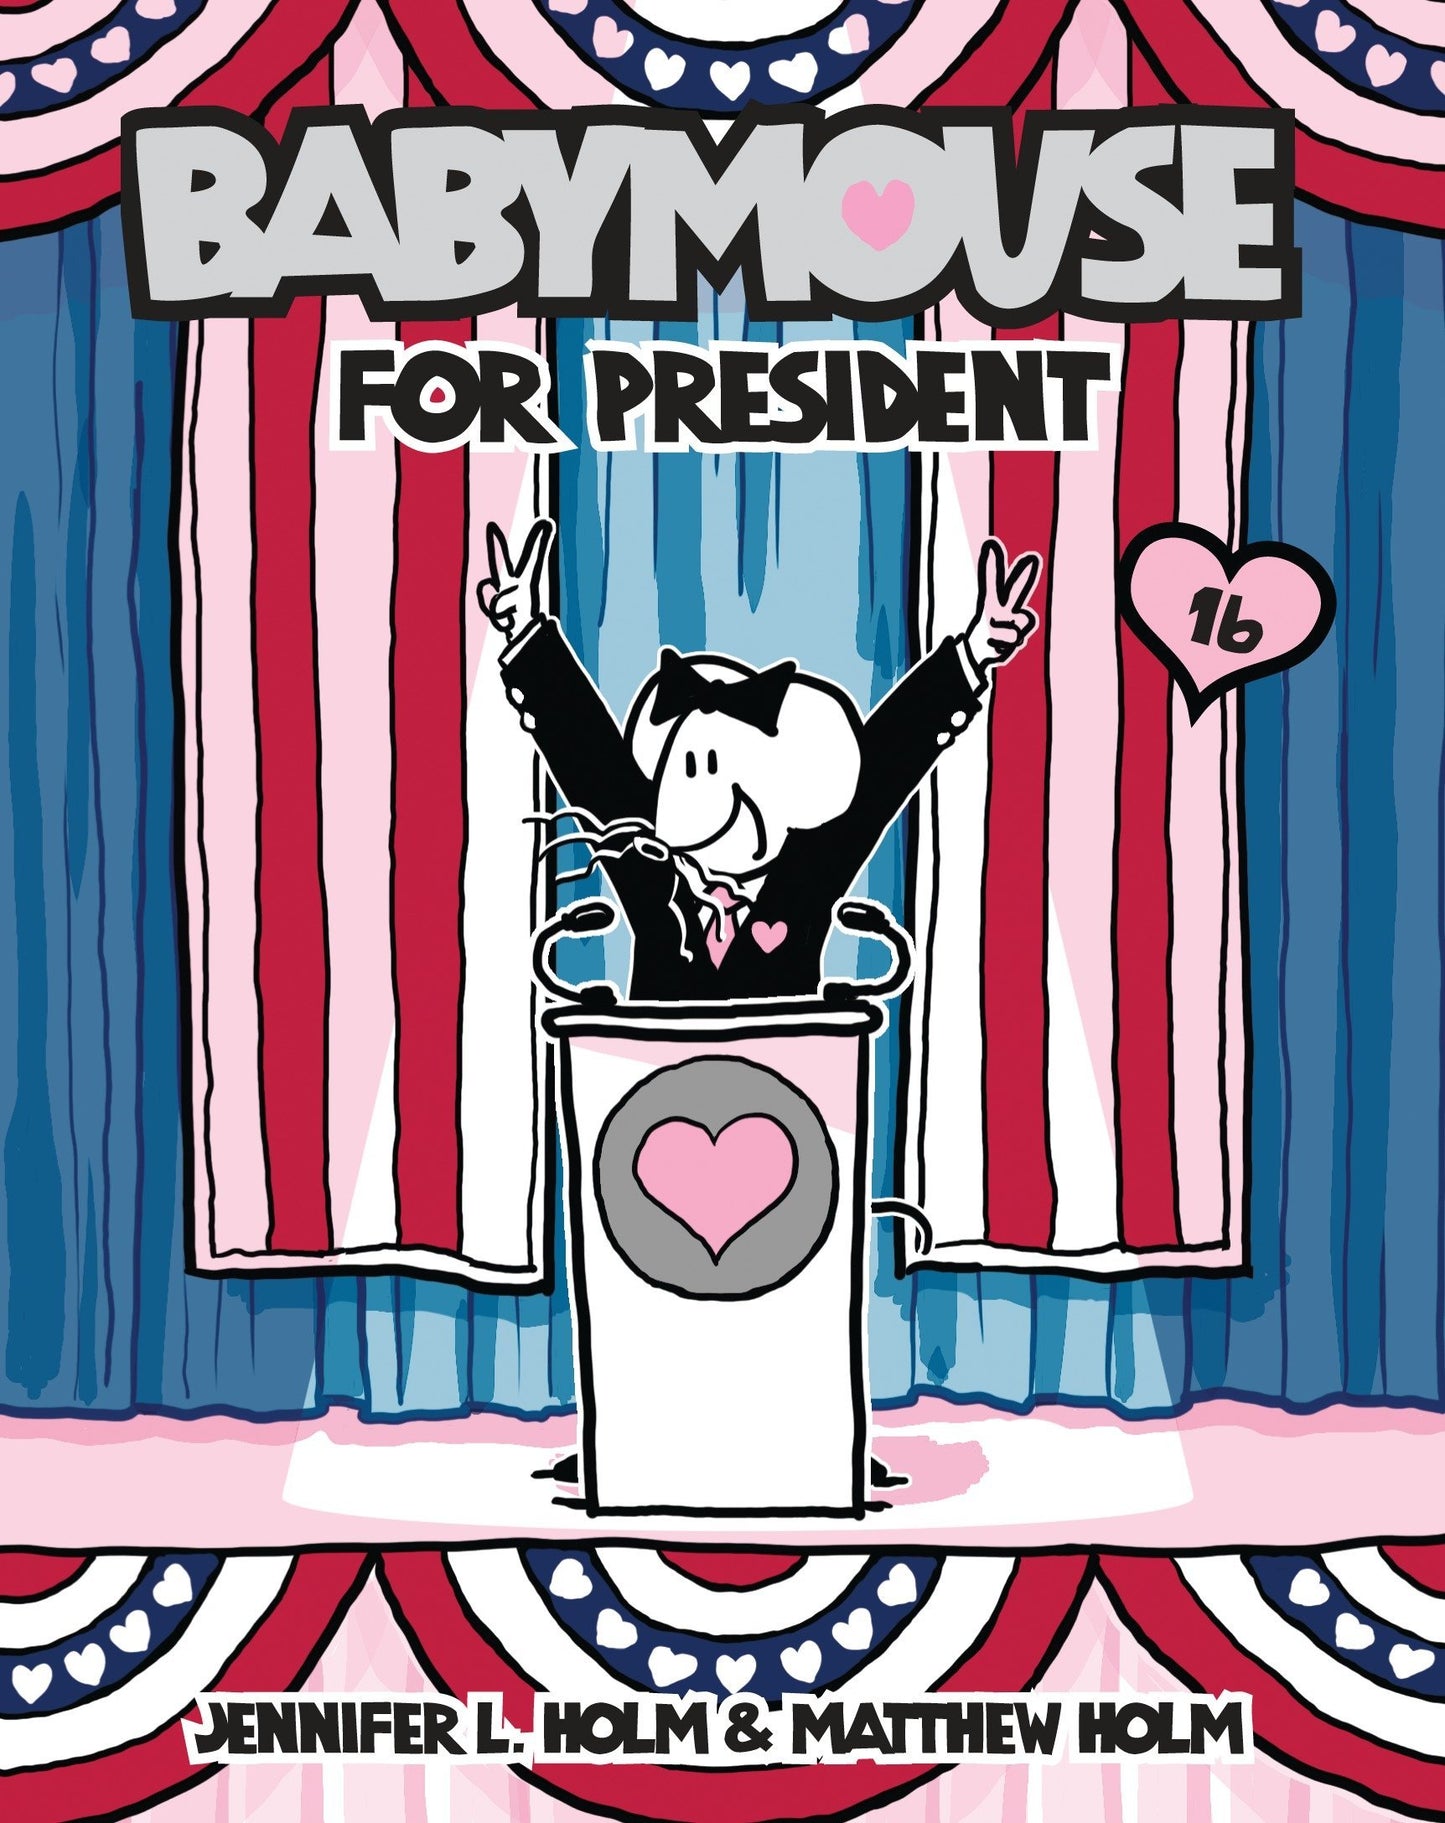 Babymouse Vol. 16 For President